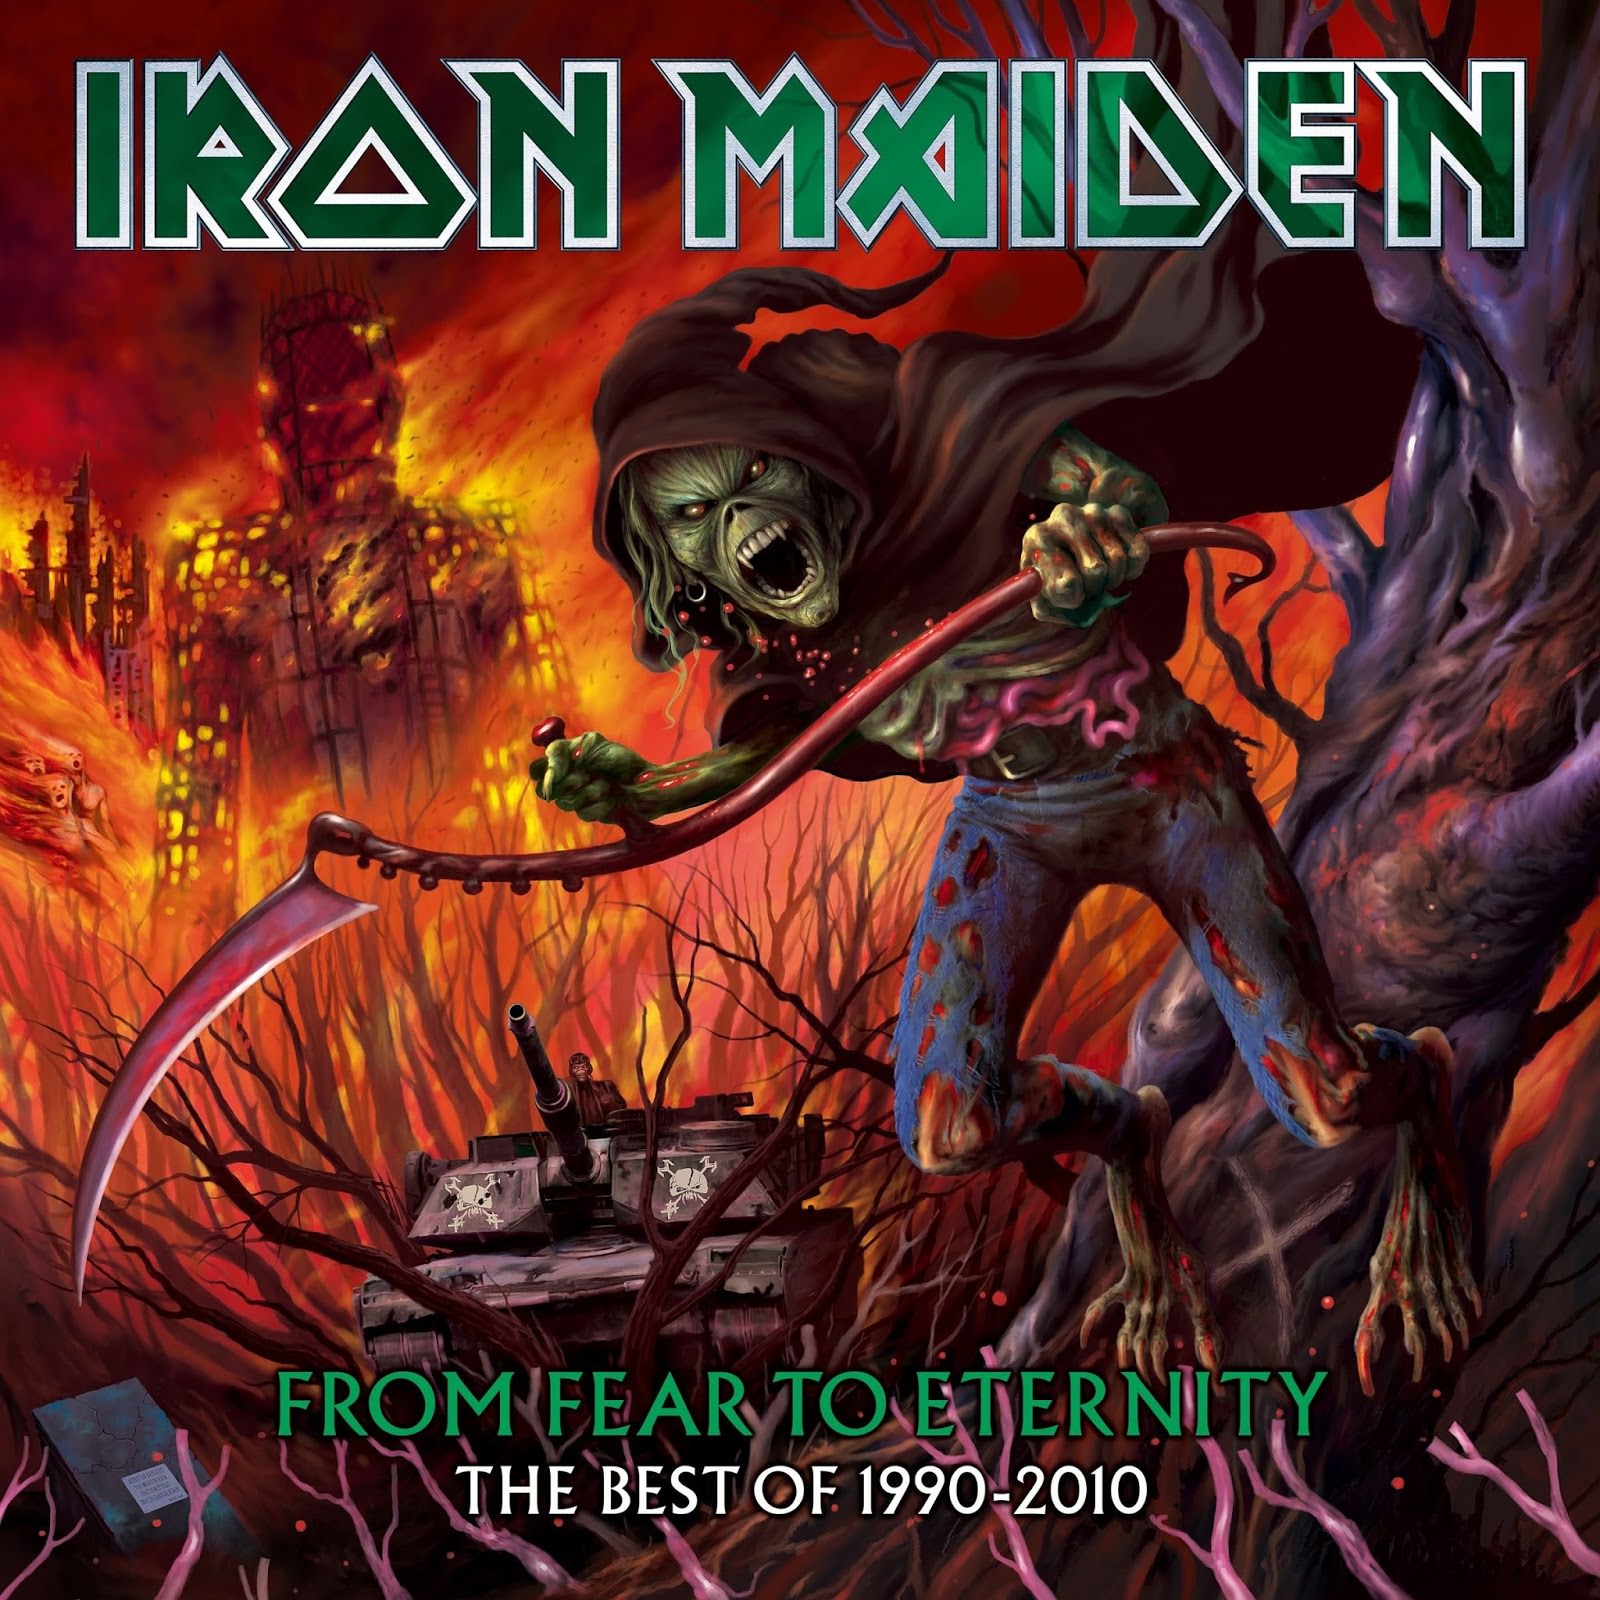 Iron Maiden – From Fear To Eternity: The Best Of 1990-2010 (2011/2015) [Qobuz FLAC 24bit/48kHz]